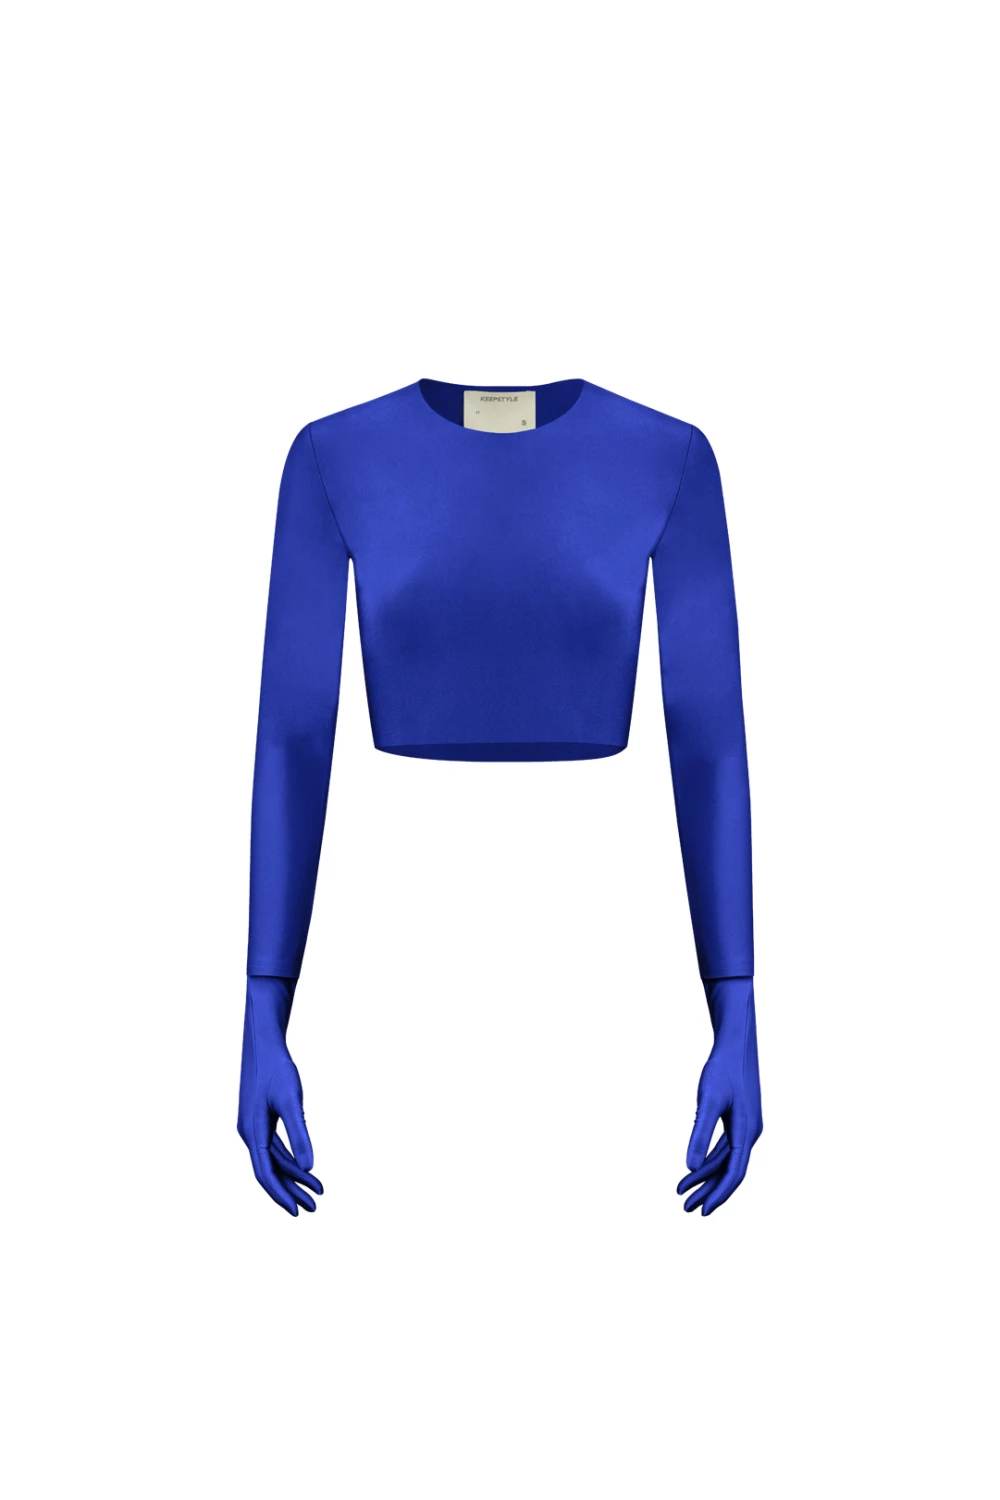 top "lilith" in electric blue color